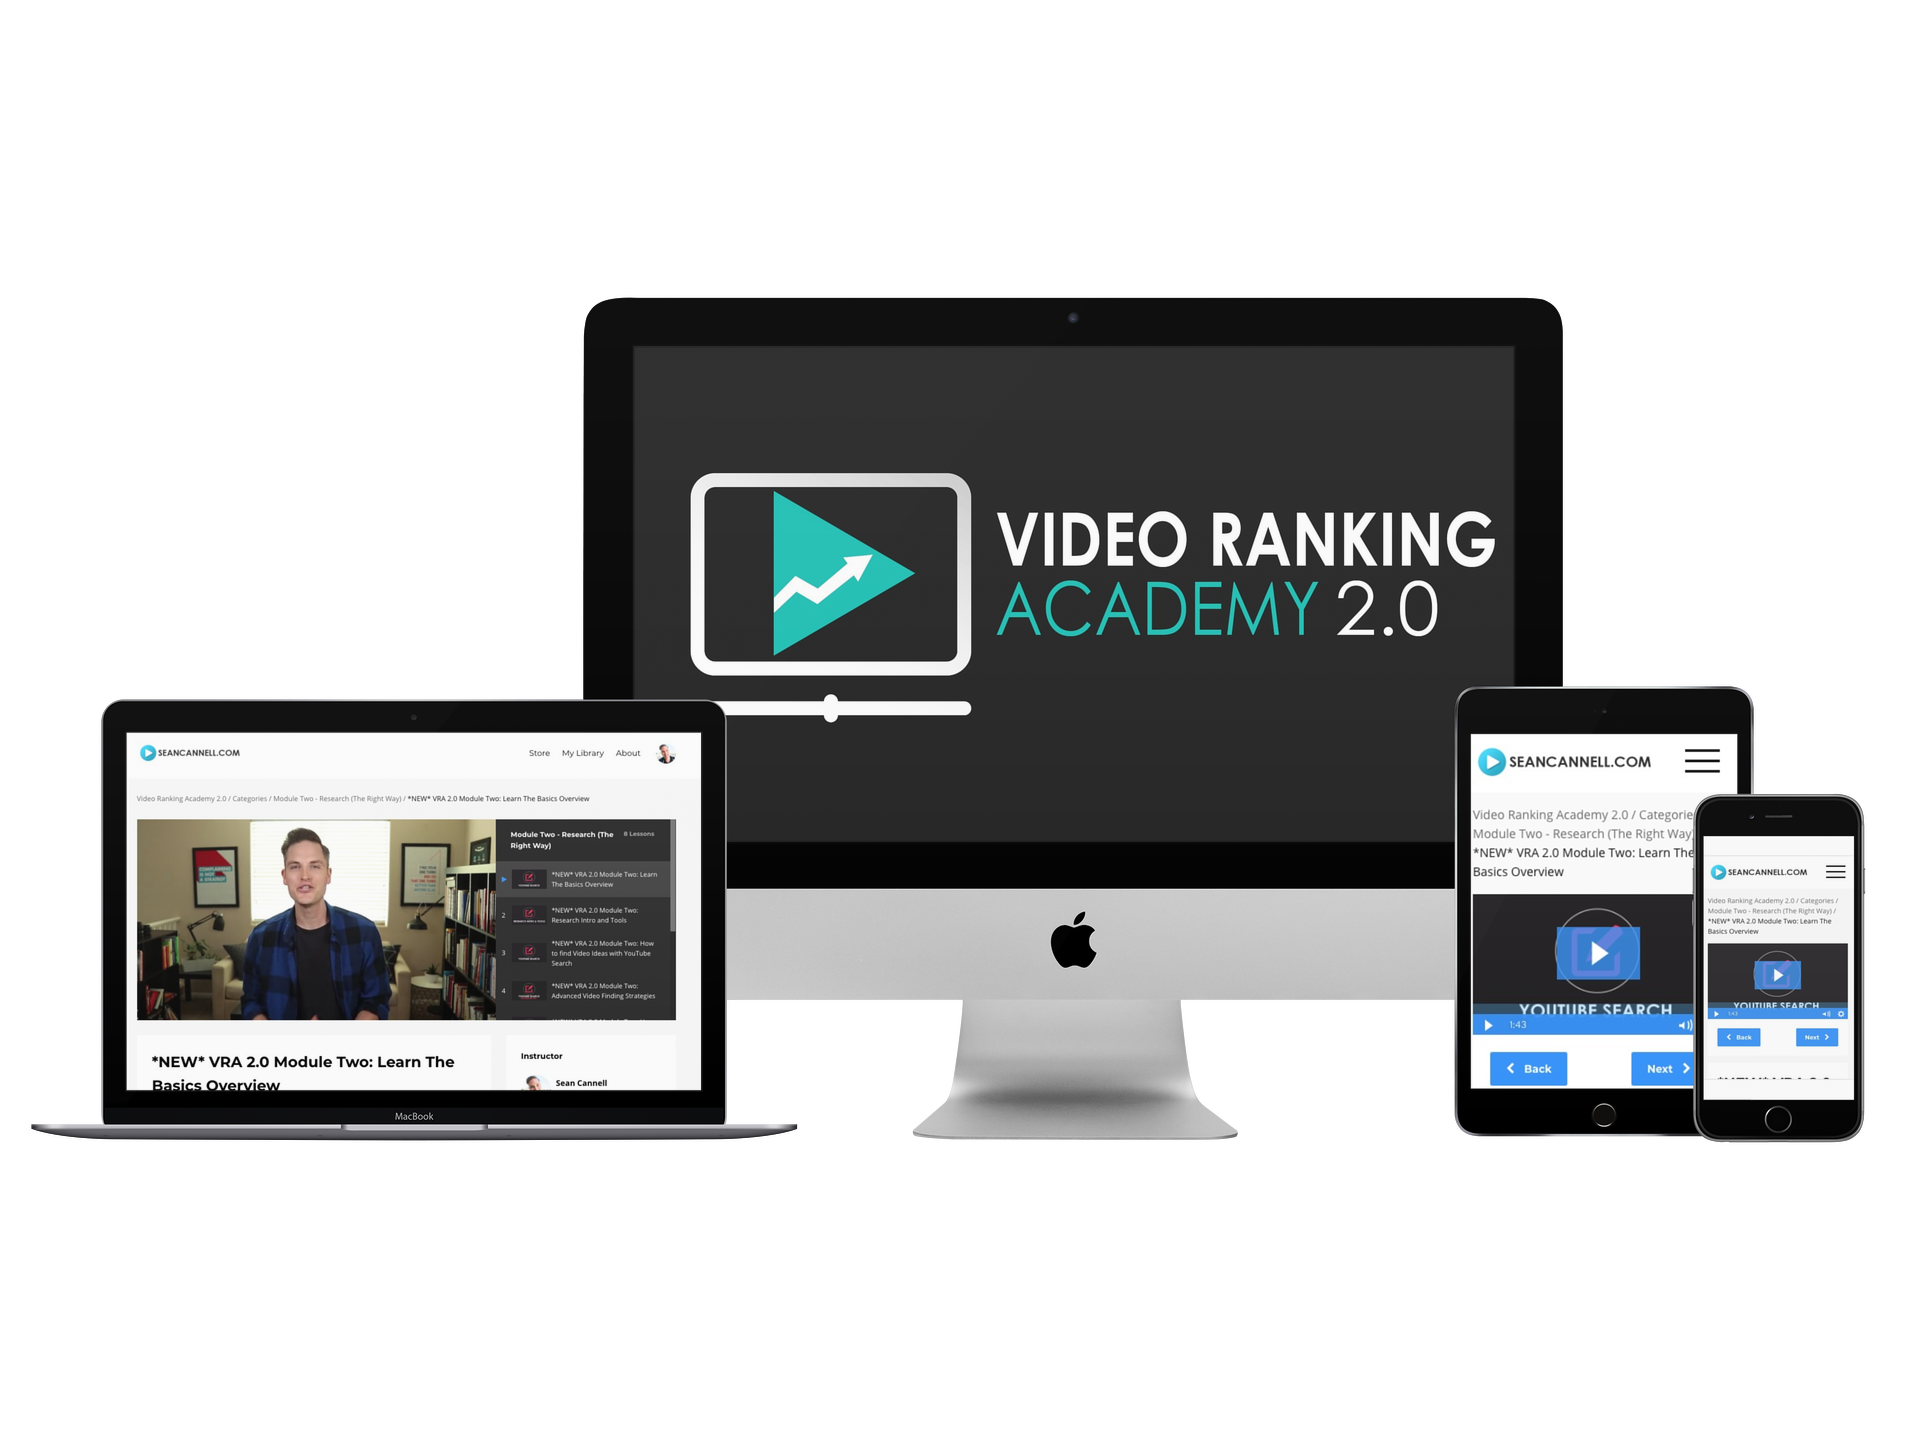 Video Ranking Academy Bundle By Sean Cannell - Free Download New & Updated Course - Also Includes The Video Ranking Academy 2.0